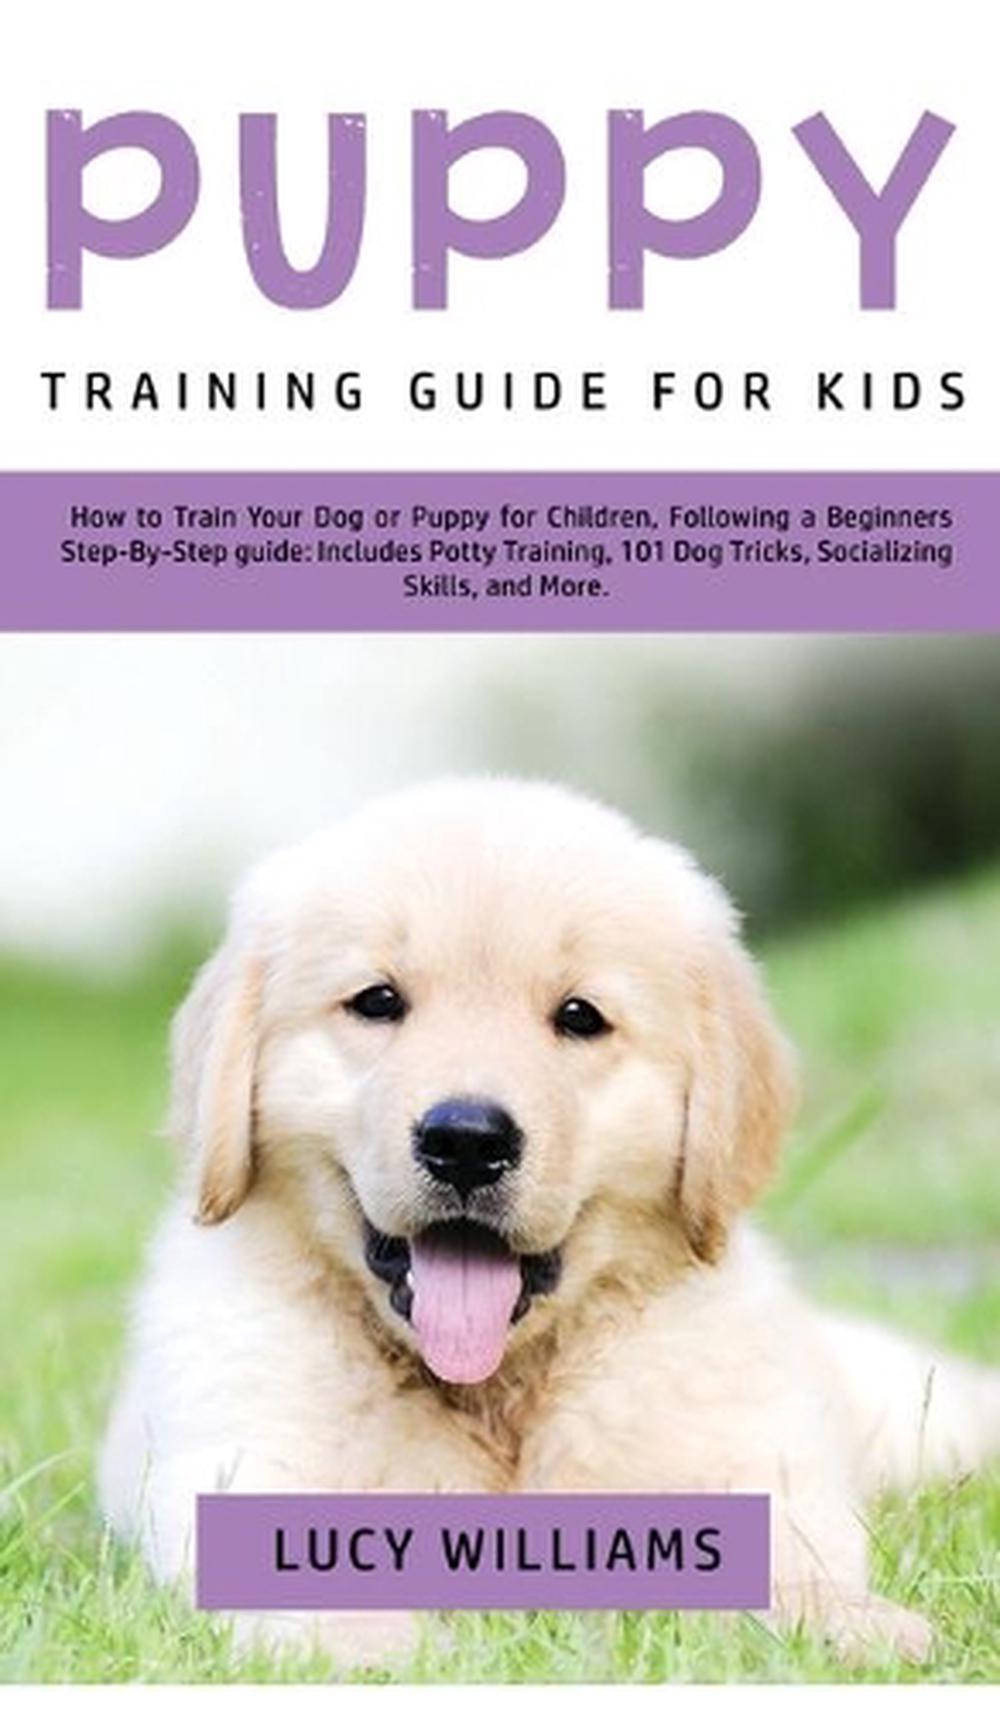 Puppy Training Guide for Kids by Lucy Williams (English